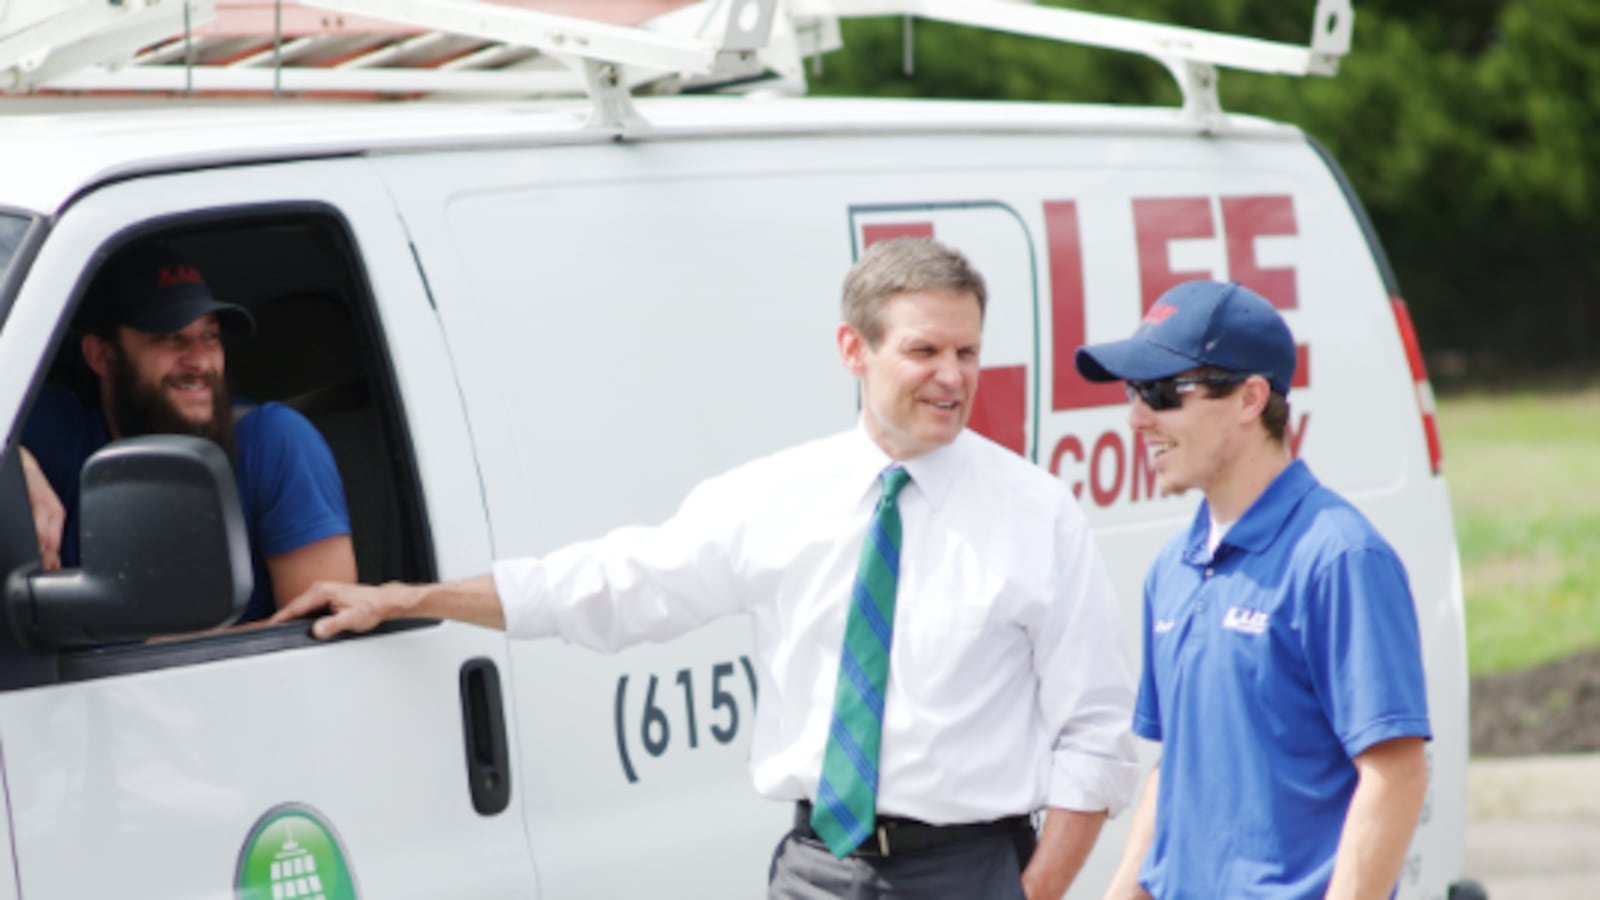 Bill Lee was elected Tennessee's 50th governor after running the Franklin-based Lee Co., a $250 million home services business with more than 1,200 employees. The Republican businessman took office in January.